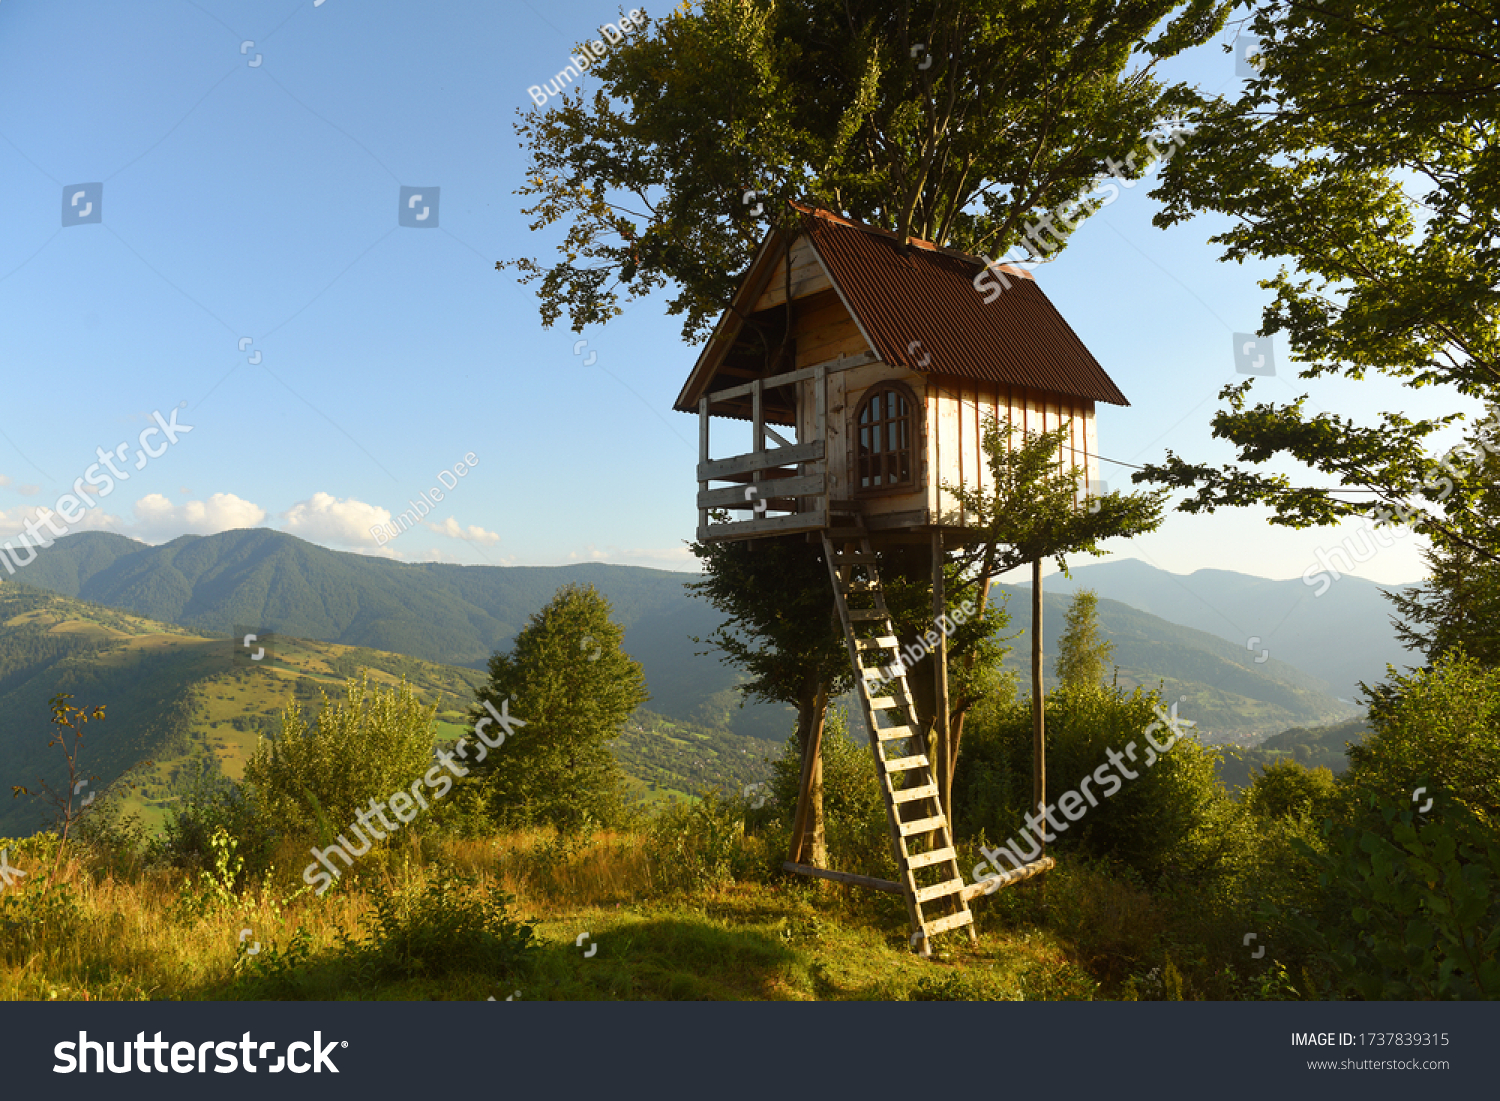 tree house in the mountains, a children's treehouse #1737839315